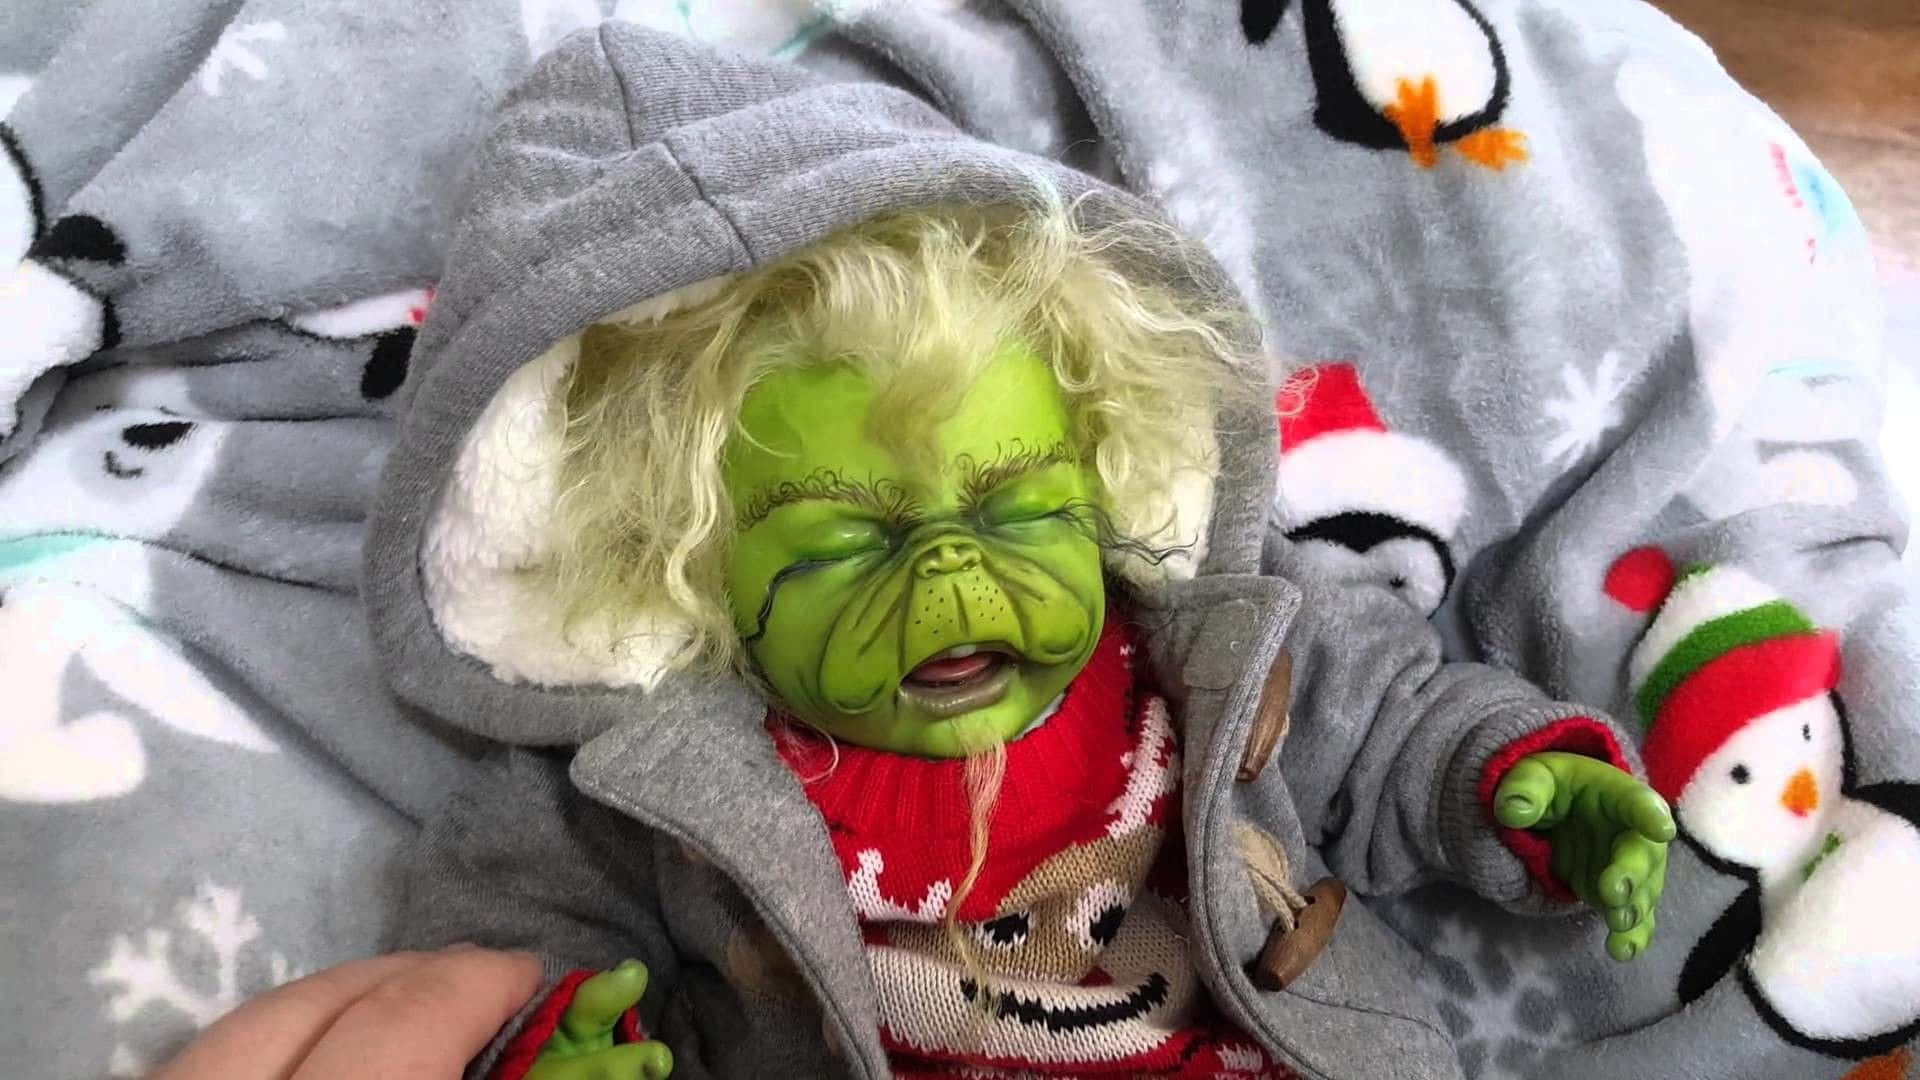 The Grinch Is Getting Ready For Christmas! Background